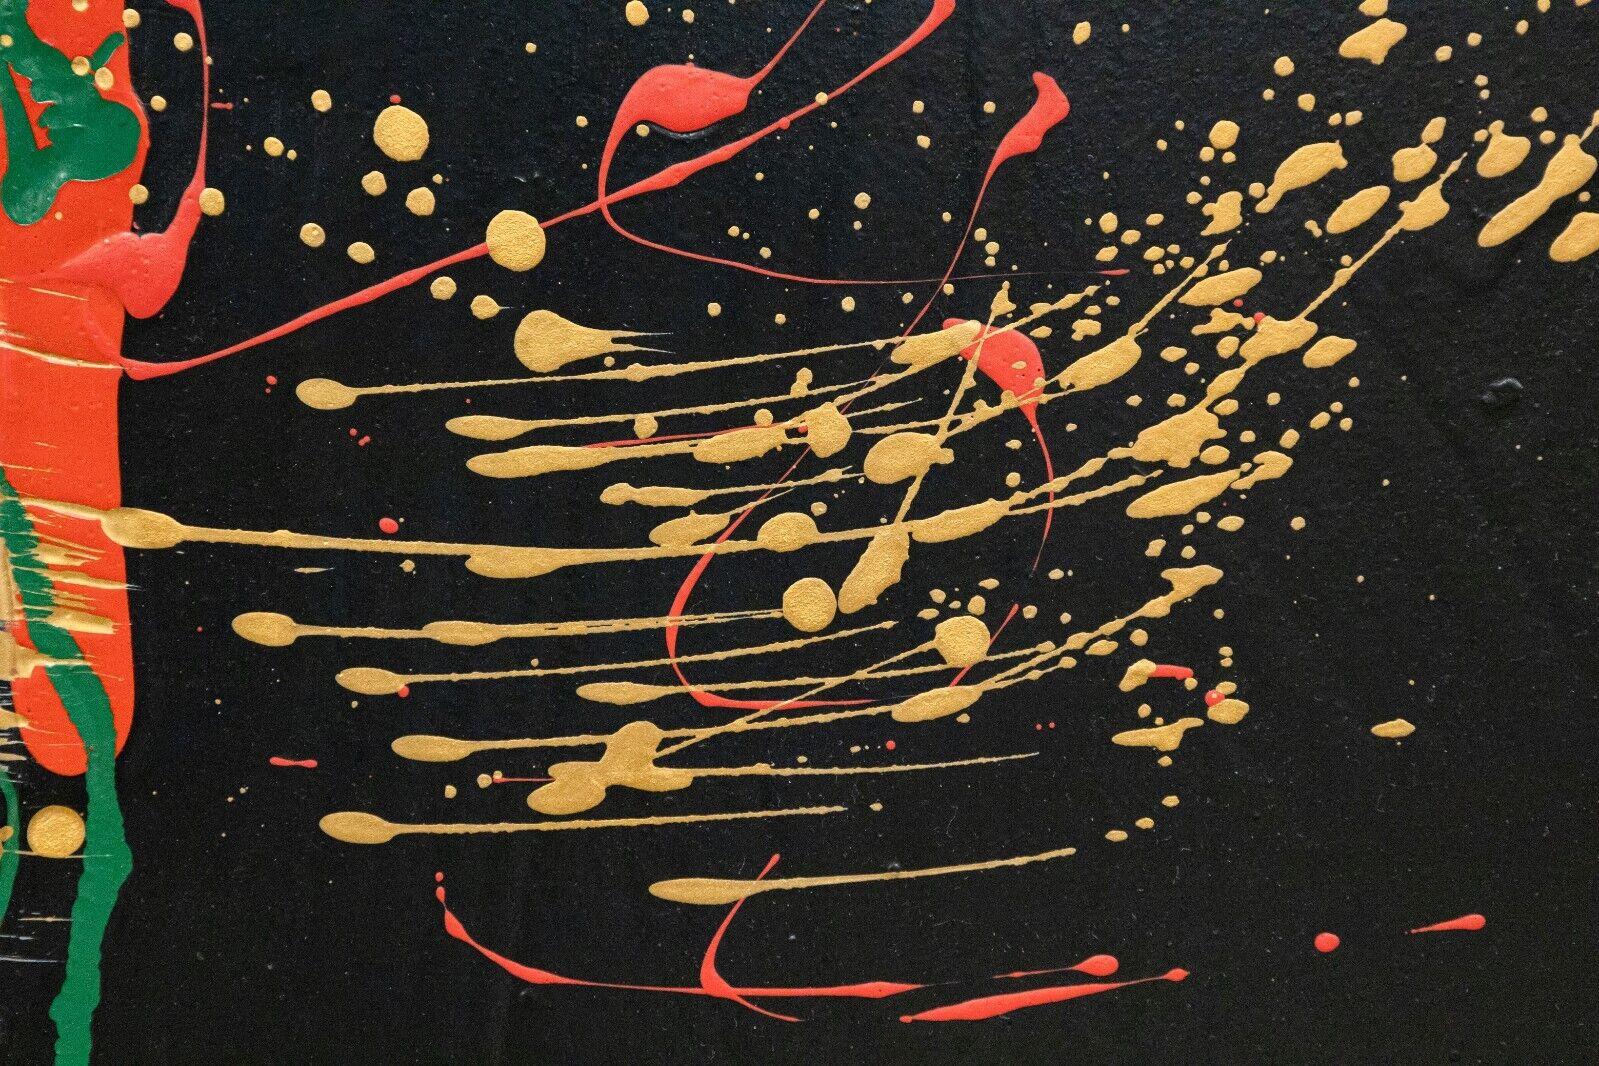 Dominic Pangborn Untitled Abstract Gold Swirl with Red & Green Painting on Board For Sale 4